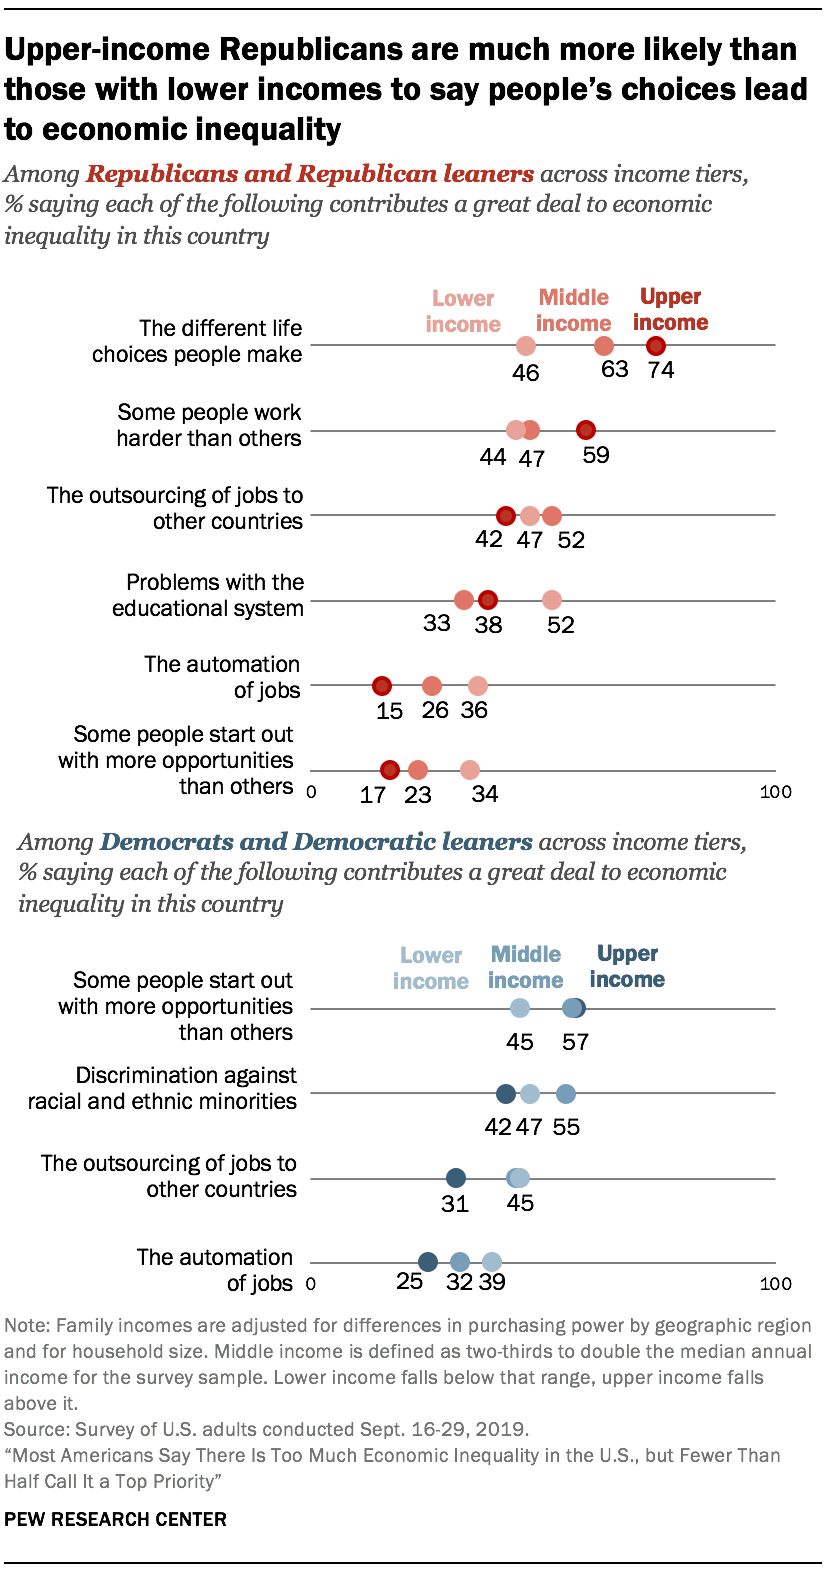 Upper-income Republicans are much more likely than those with lower incomes to say people’s choices lead to economic inequality 